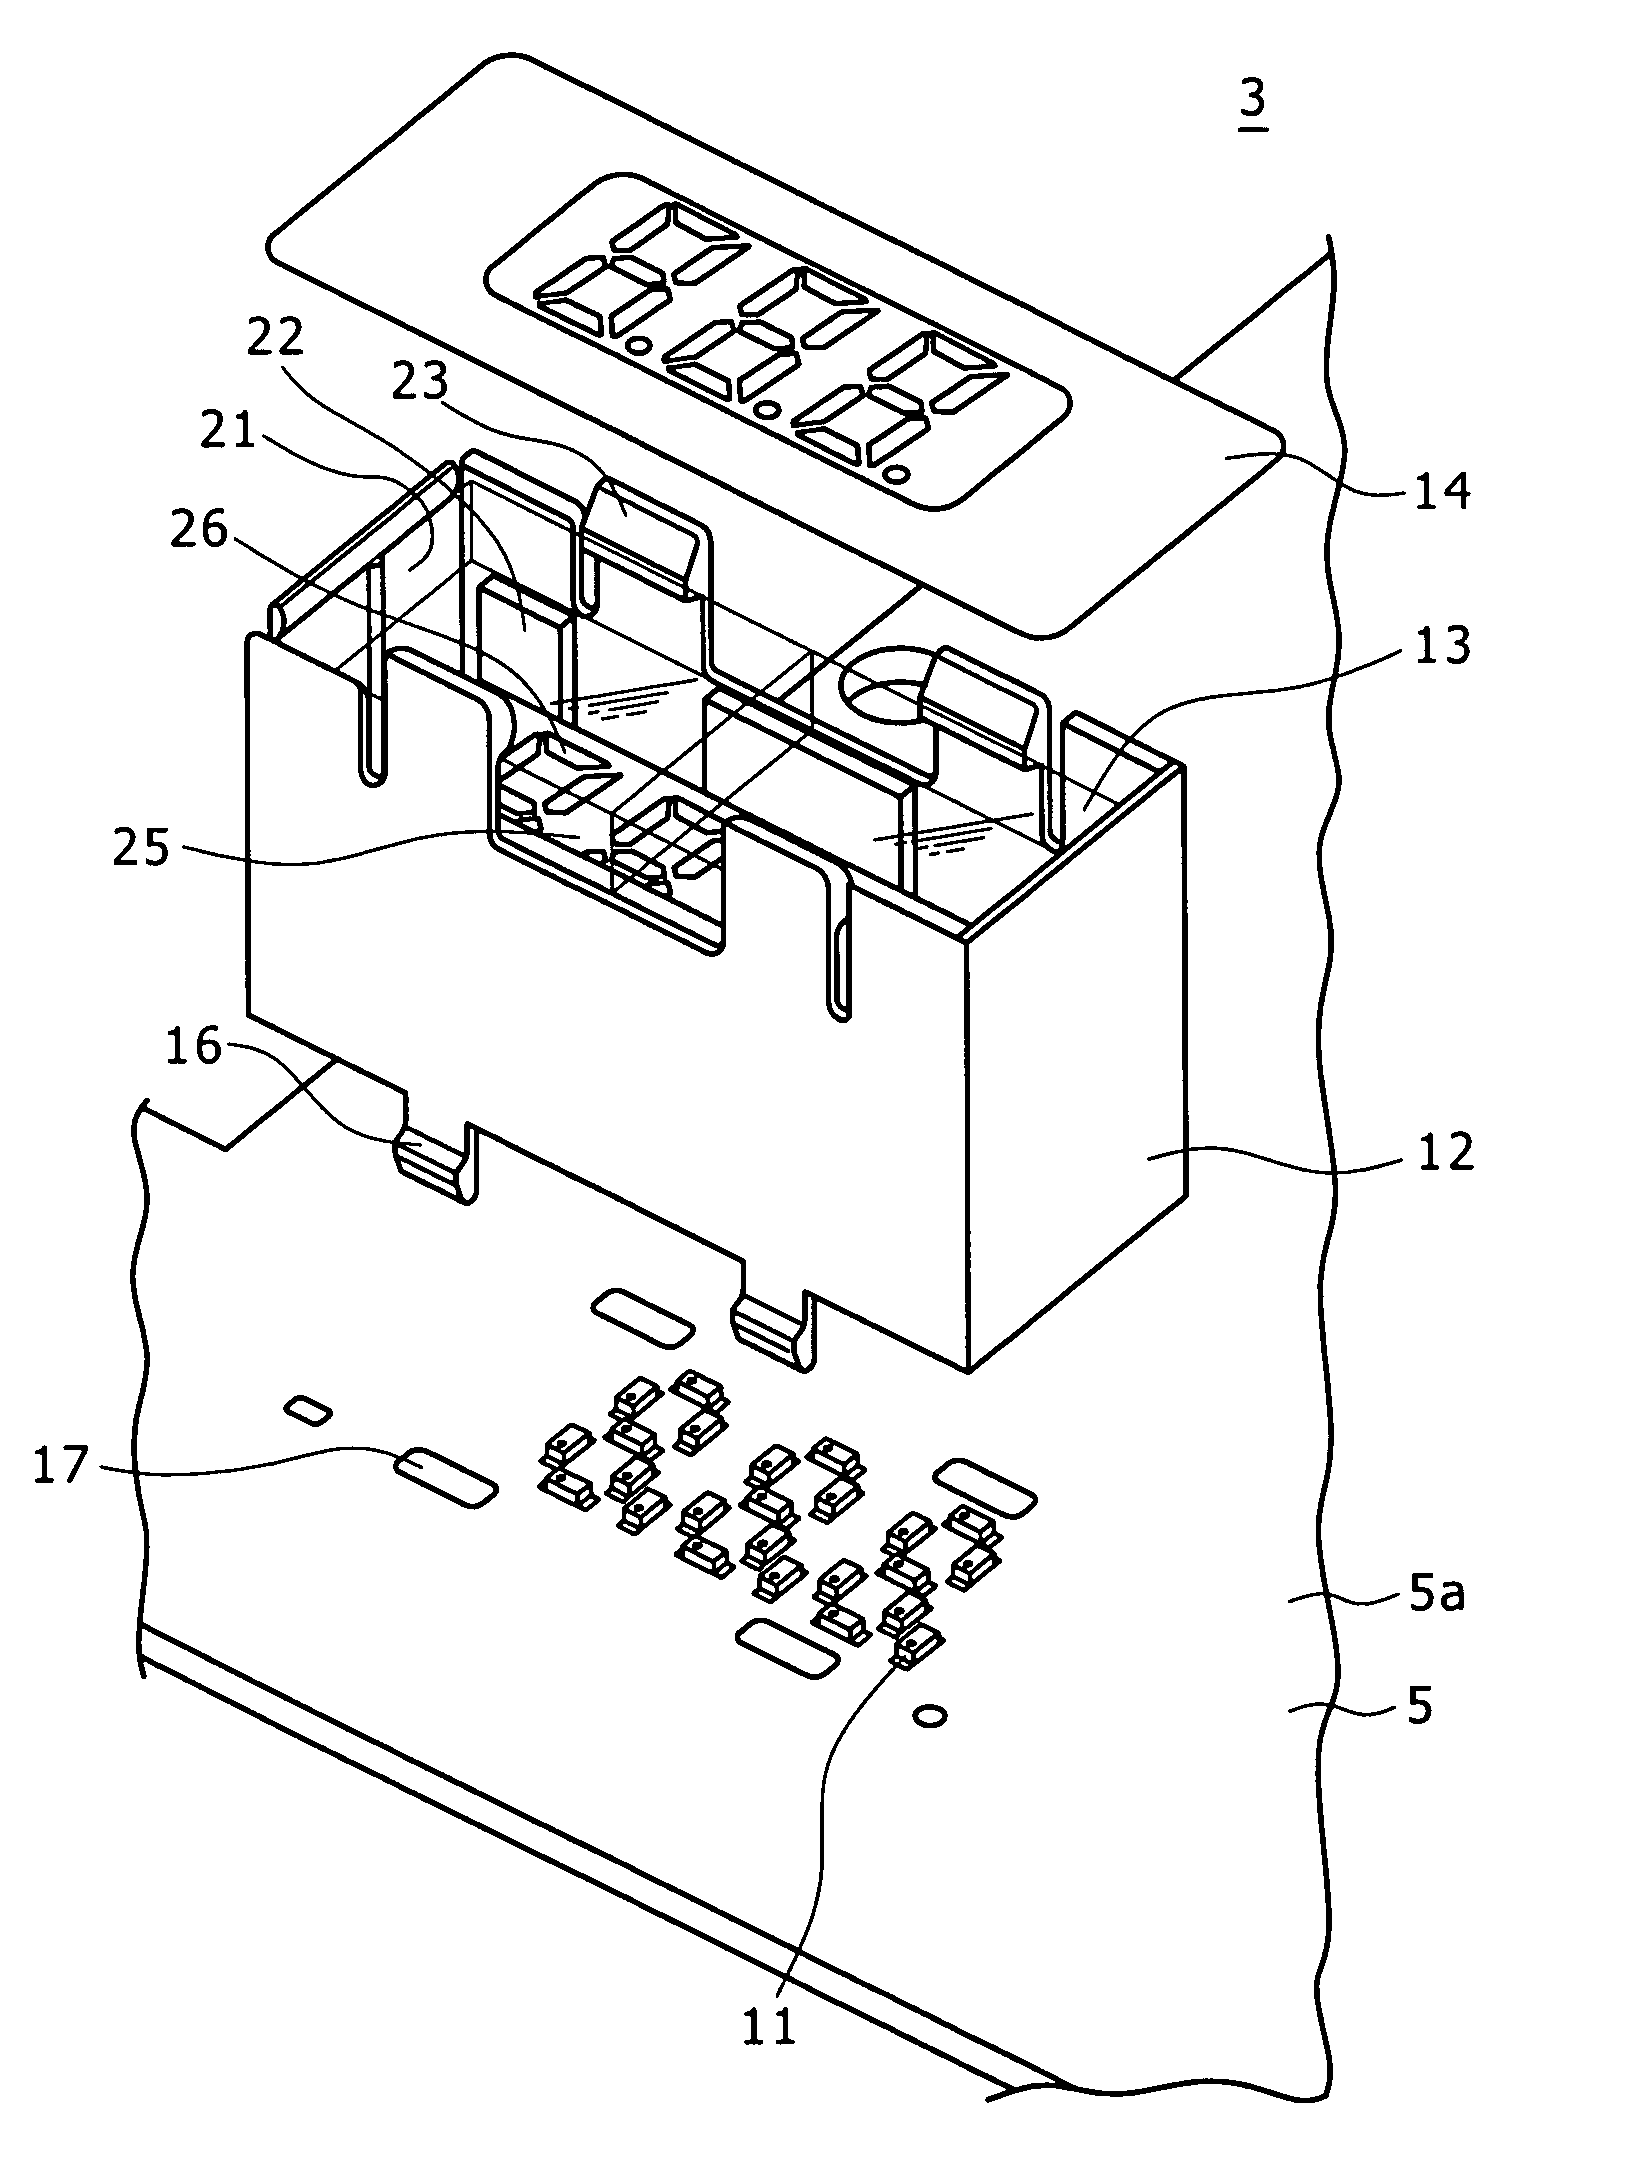 Control panel device and display